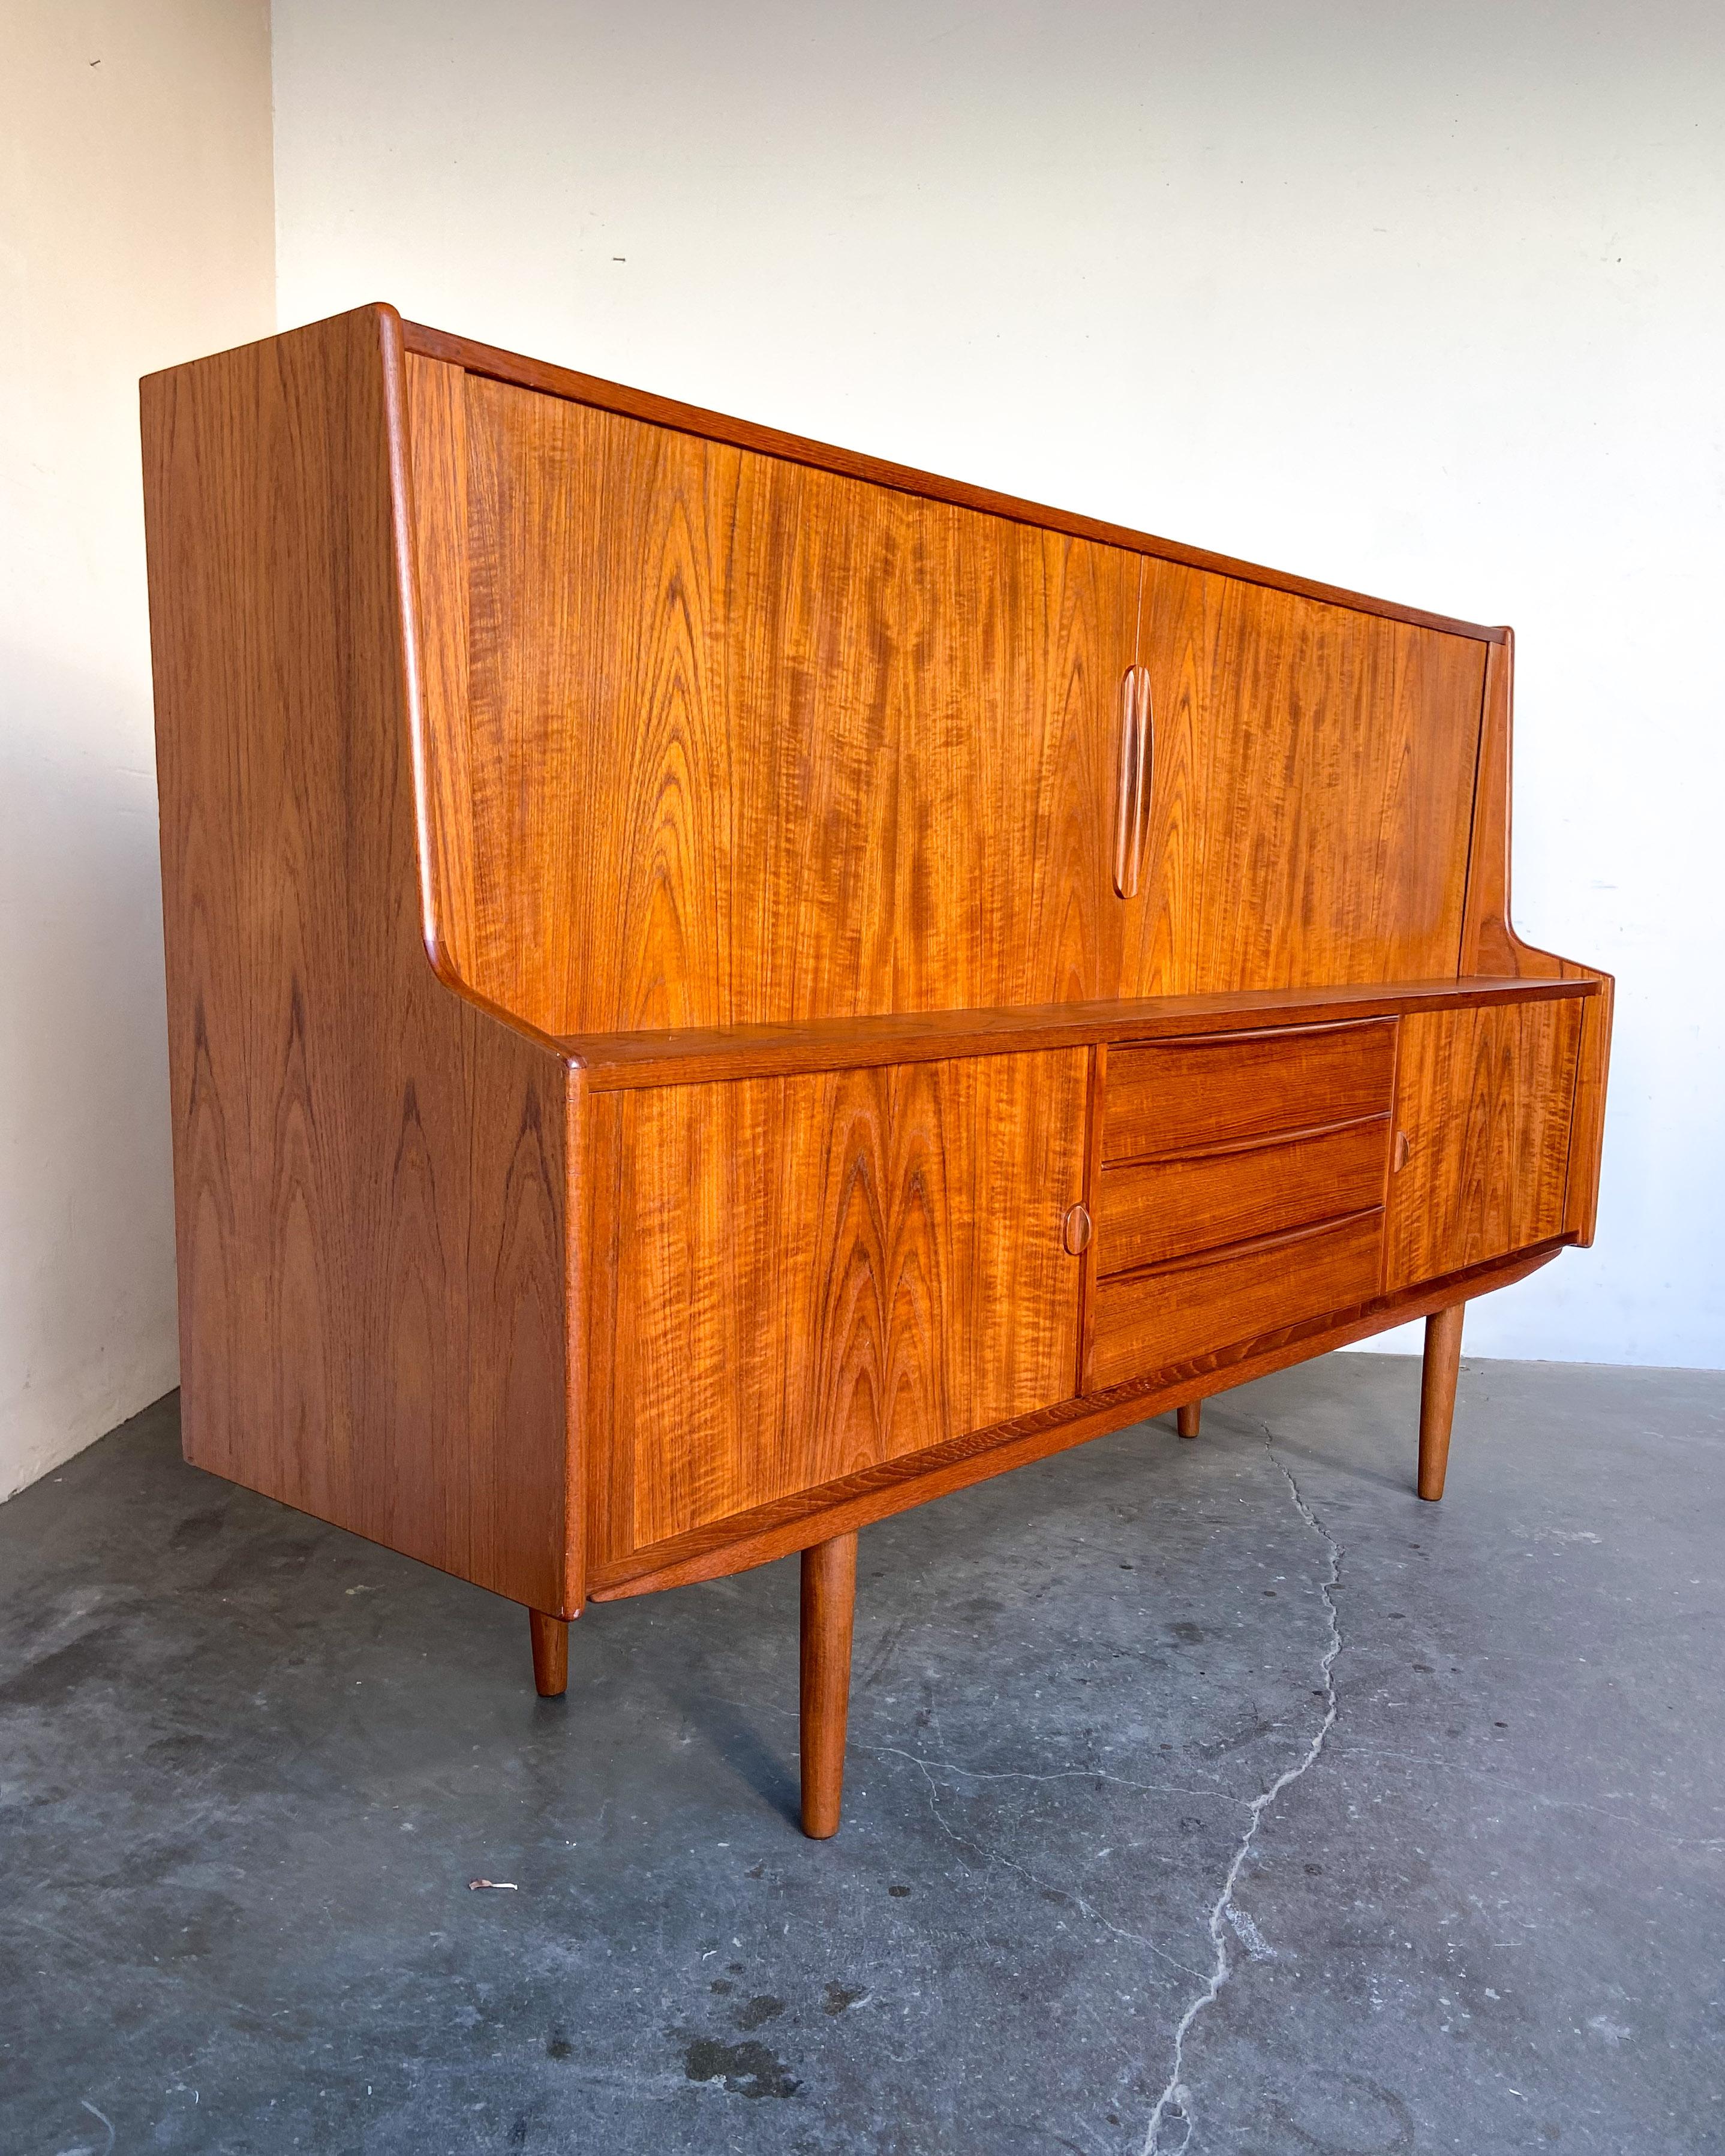 Beautiful teak wood highboard cabinet with sliding tambour doors. Designed by Svend Aage Larsen for Danish Control circa 1960s. Lots of storage with adjustable shelves, shallow emerald felt-lined drawers on top and lower larger drawers. Stunning